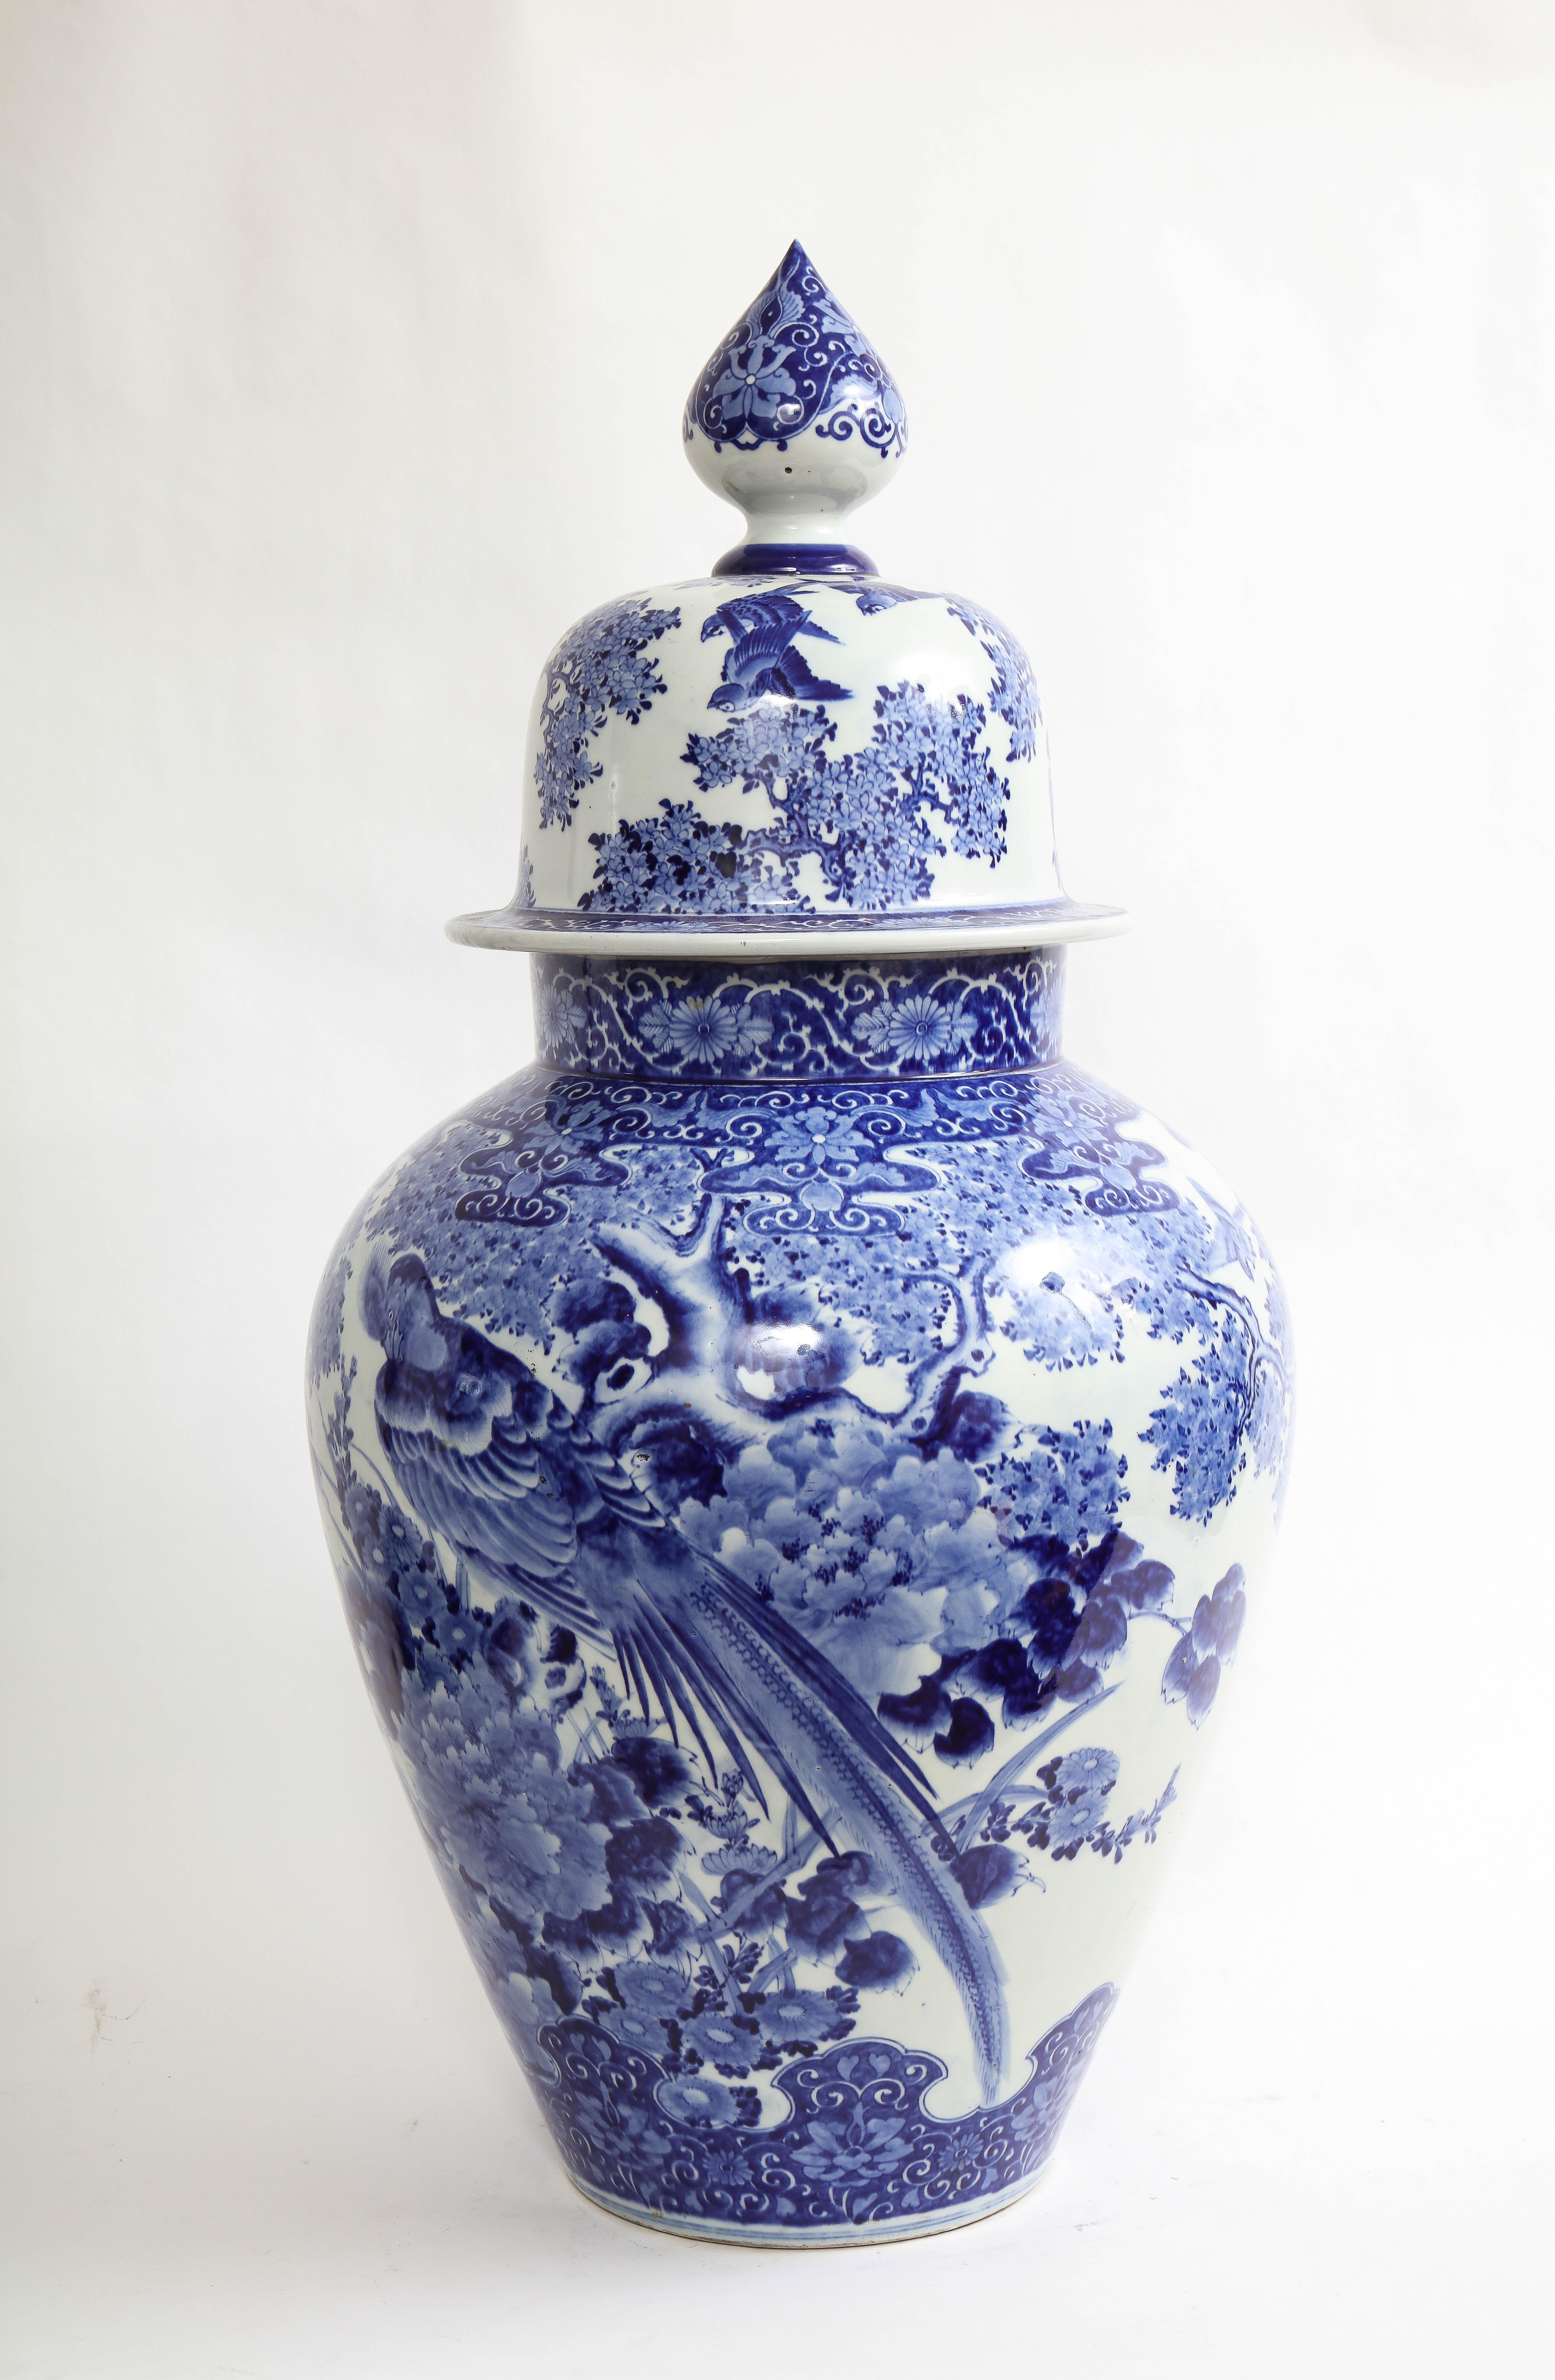 A Large Meiji Period Japanese Blue and White Covered vase with Pheasant and Flower Decoration. This piece is absolutely massive and beautifully decorated with hand-painted blue figures of pheasants on the body of the vase, as well as flowers, trees,